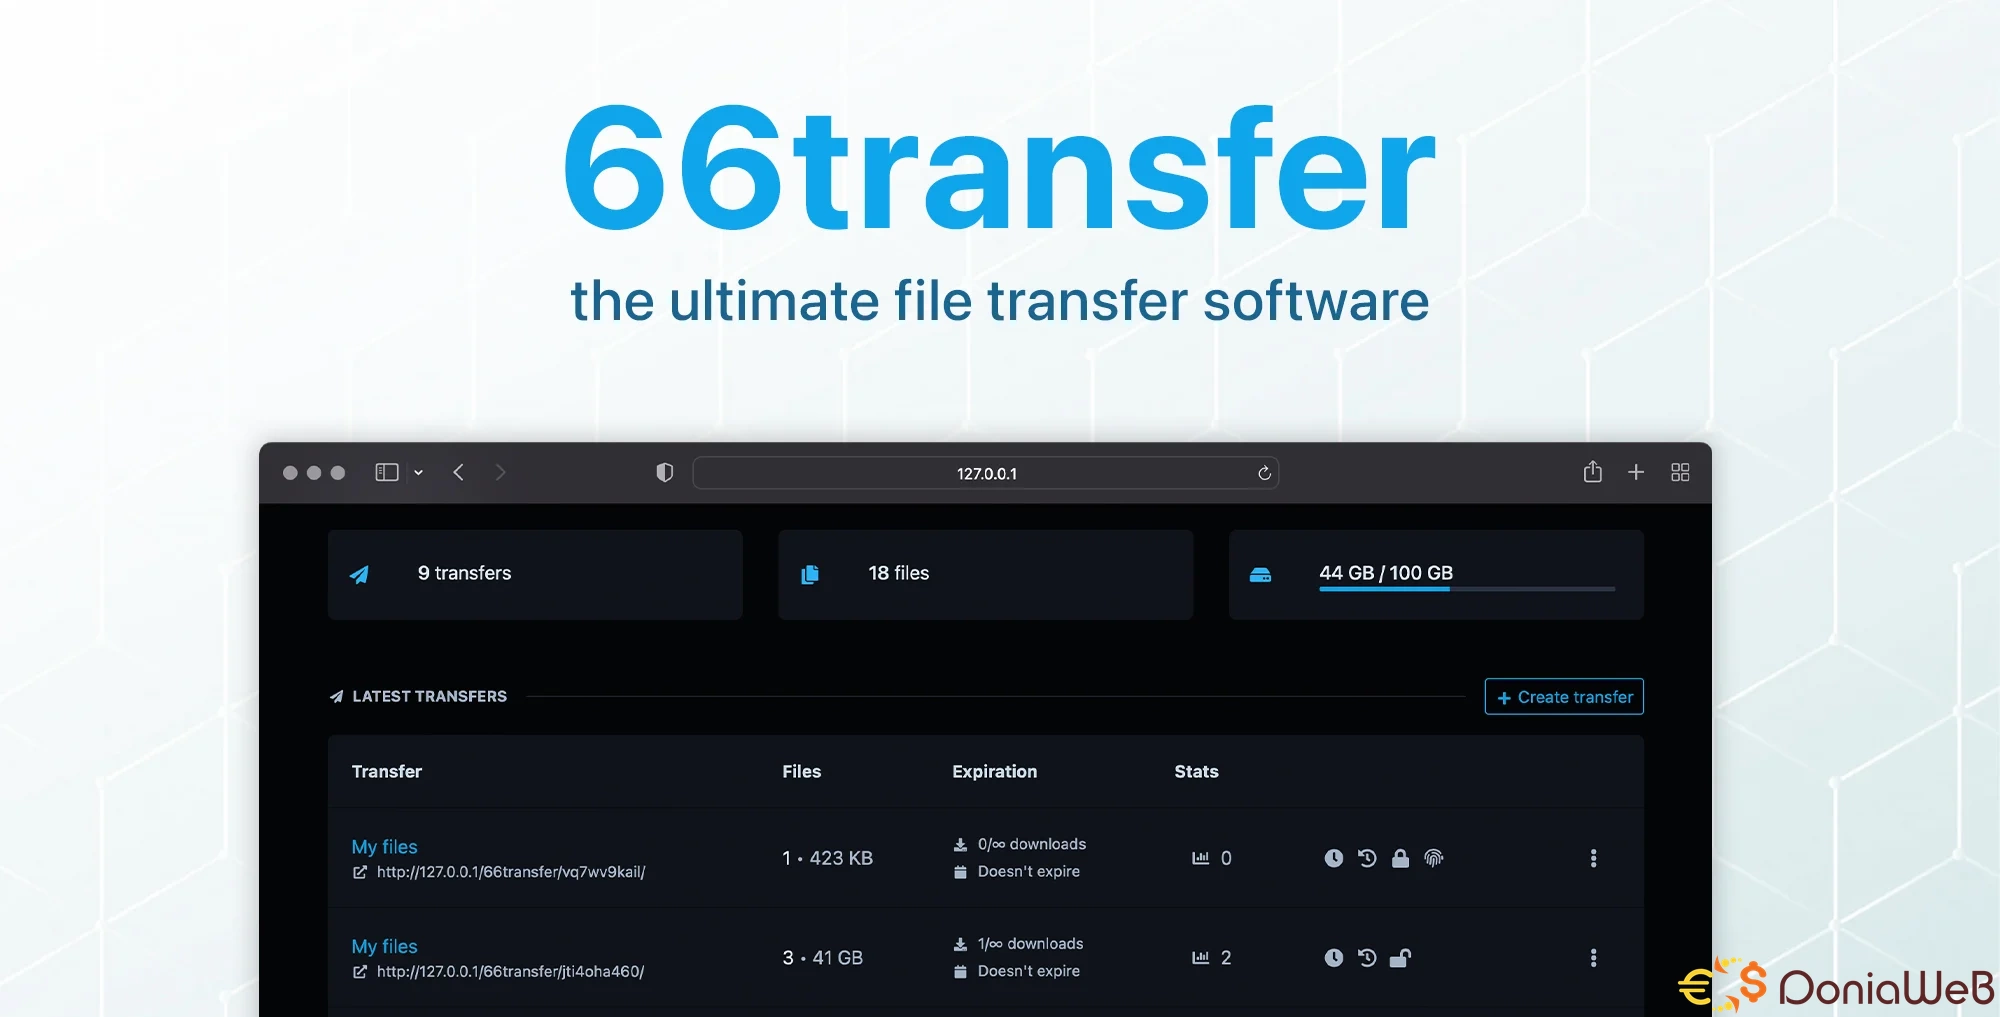 66transfer - The Ultimate File Transfer Software [Extended License]